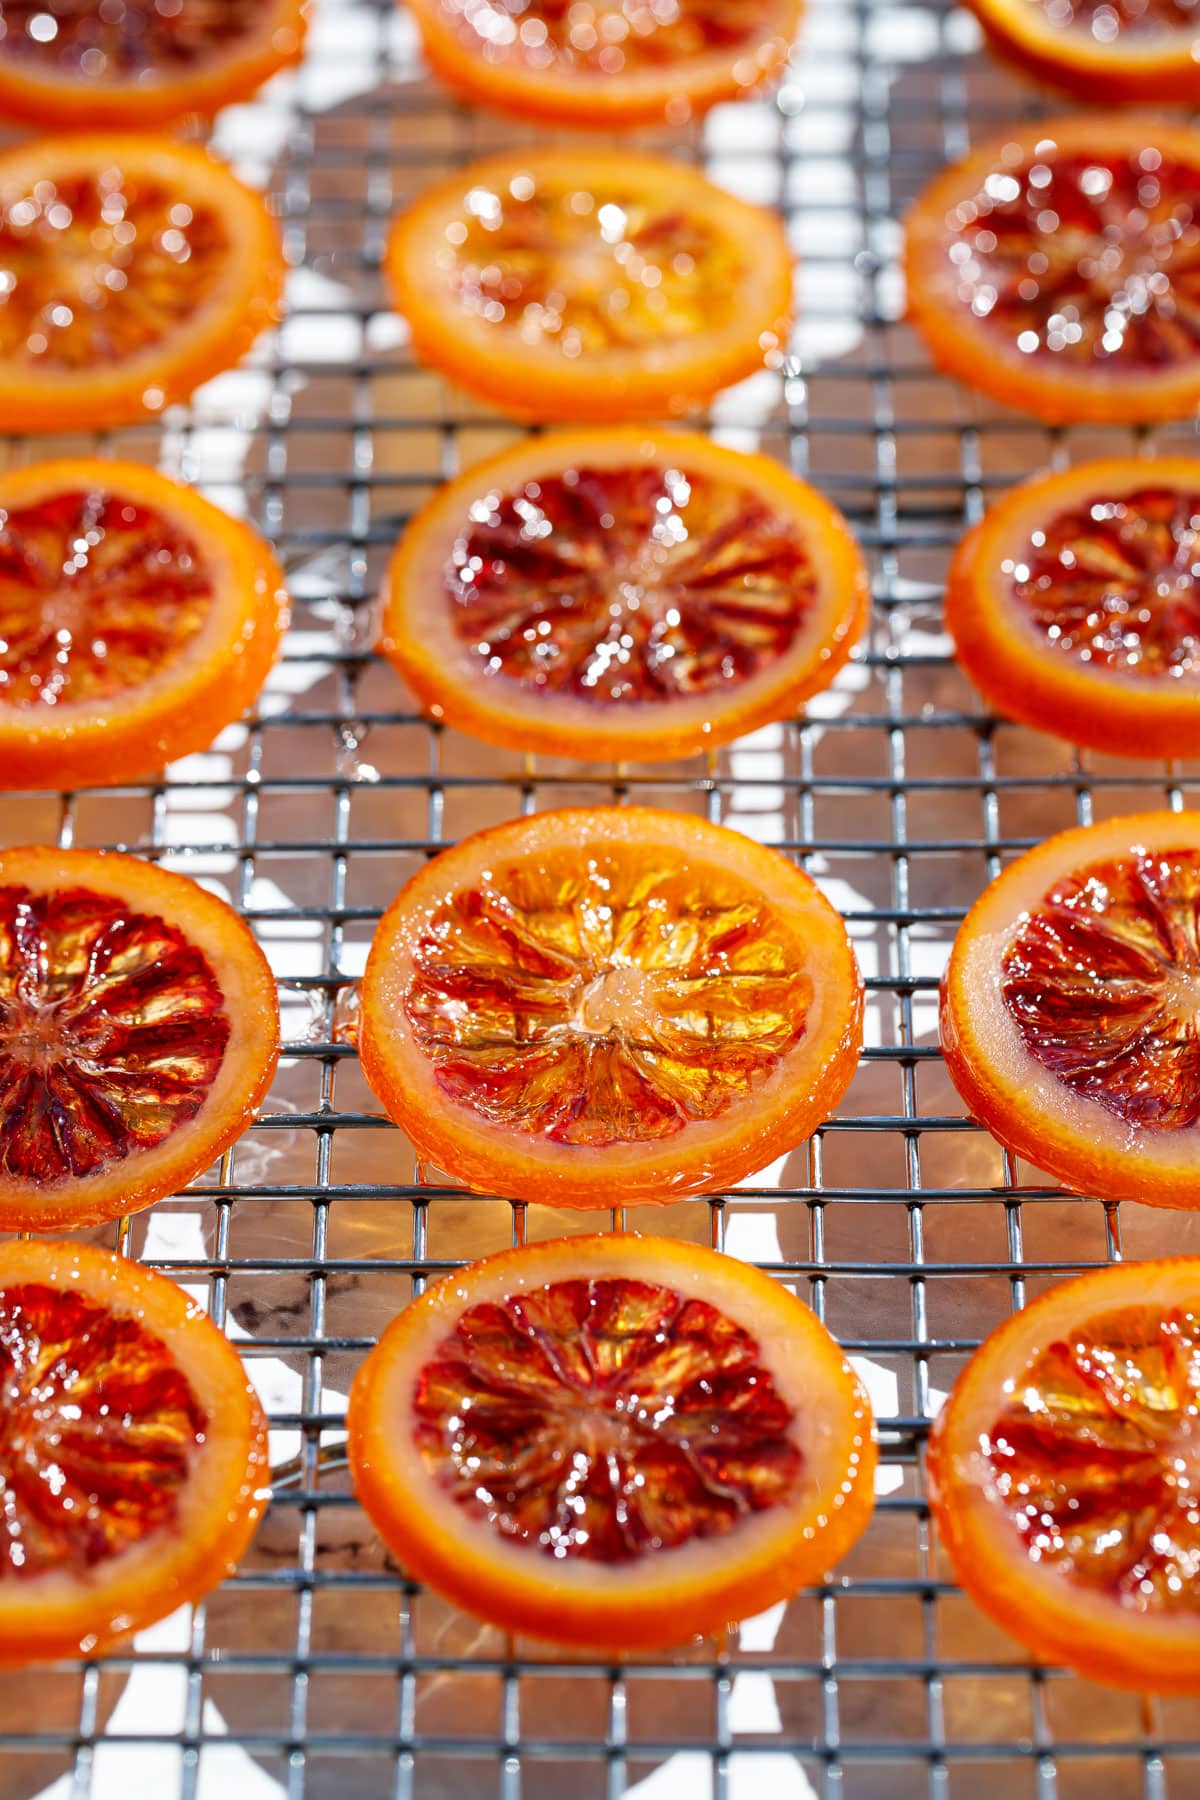 Homemade Candied Blood Orange Slices on a wire rack in bright direct light to showcase the stained-glass like appearance.